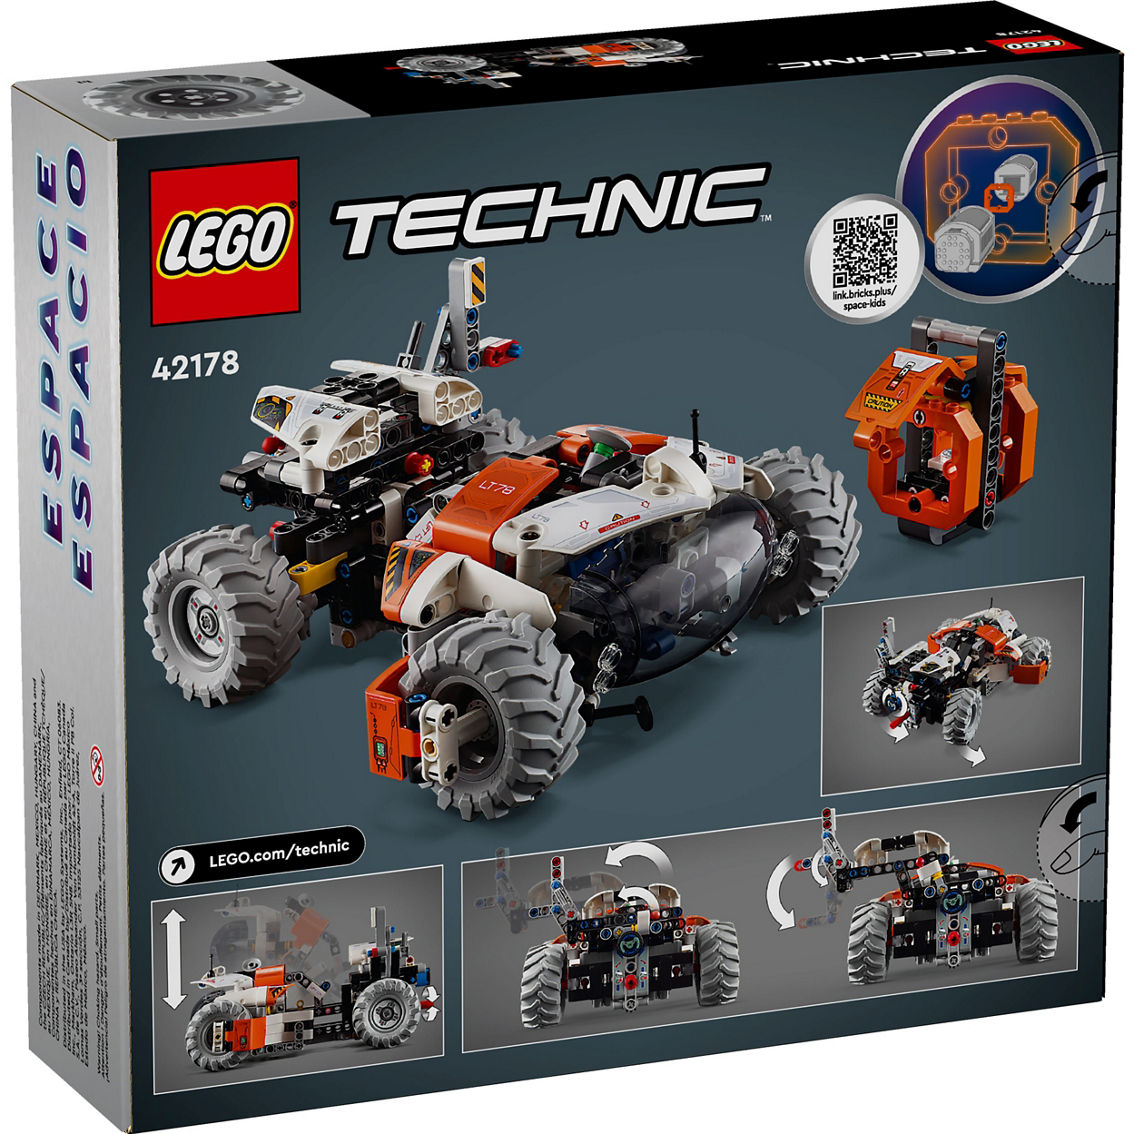 LEGO Technic Surface Space Loader LT78 42178 - Image 2 of 10